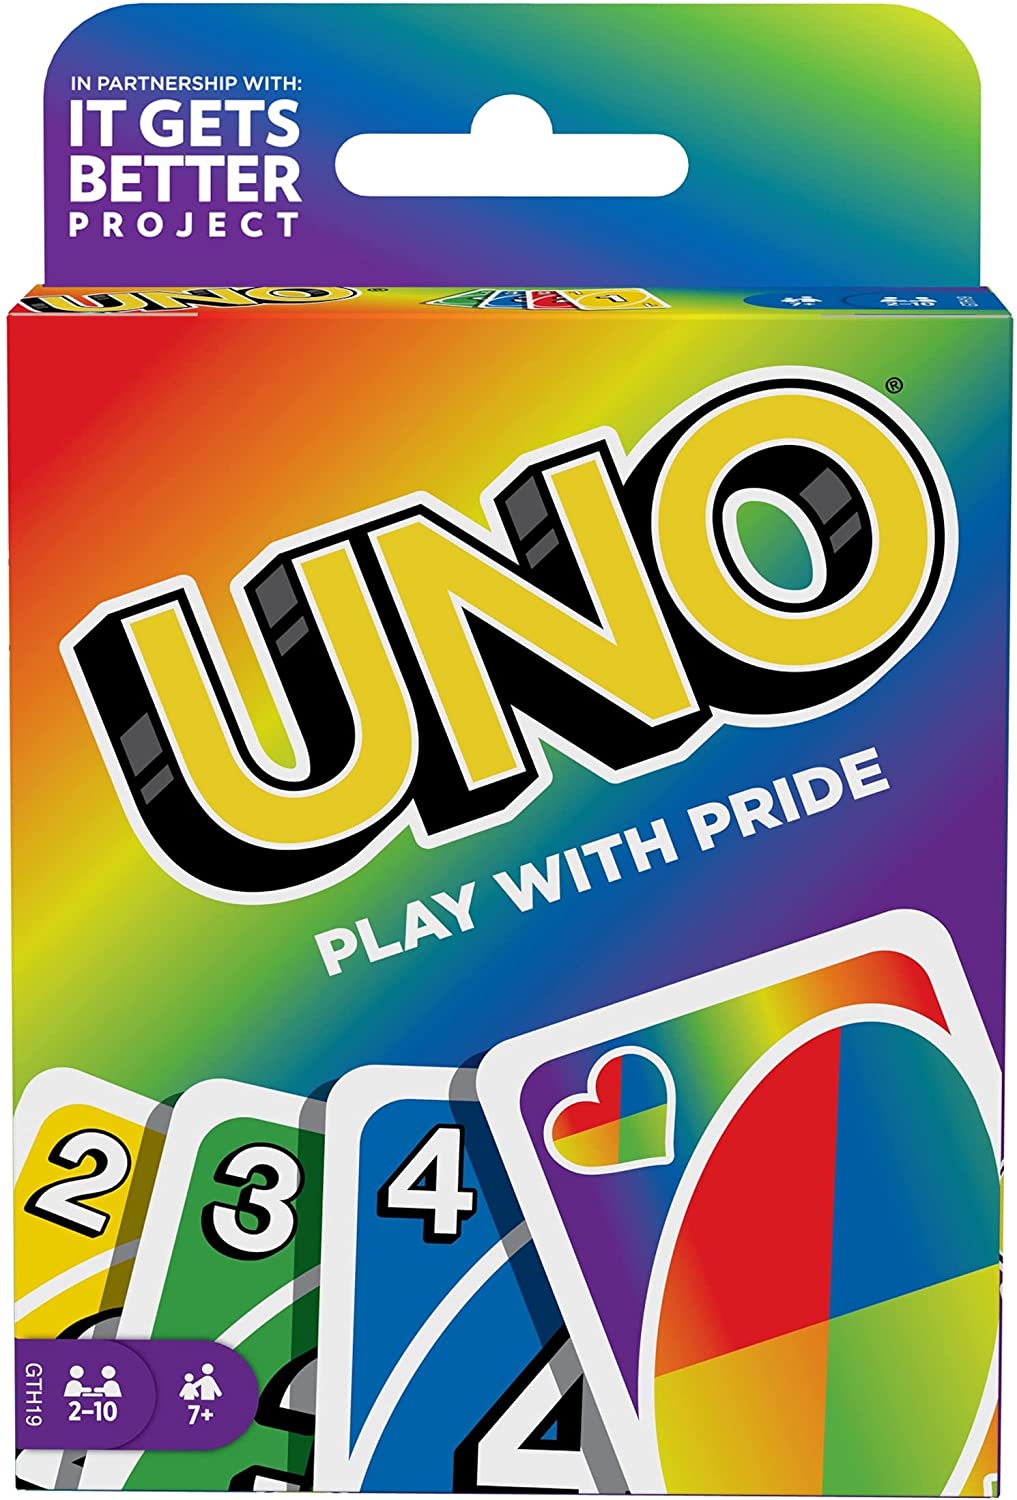 I made uno stickers! : r/lgbt